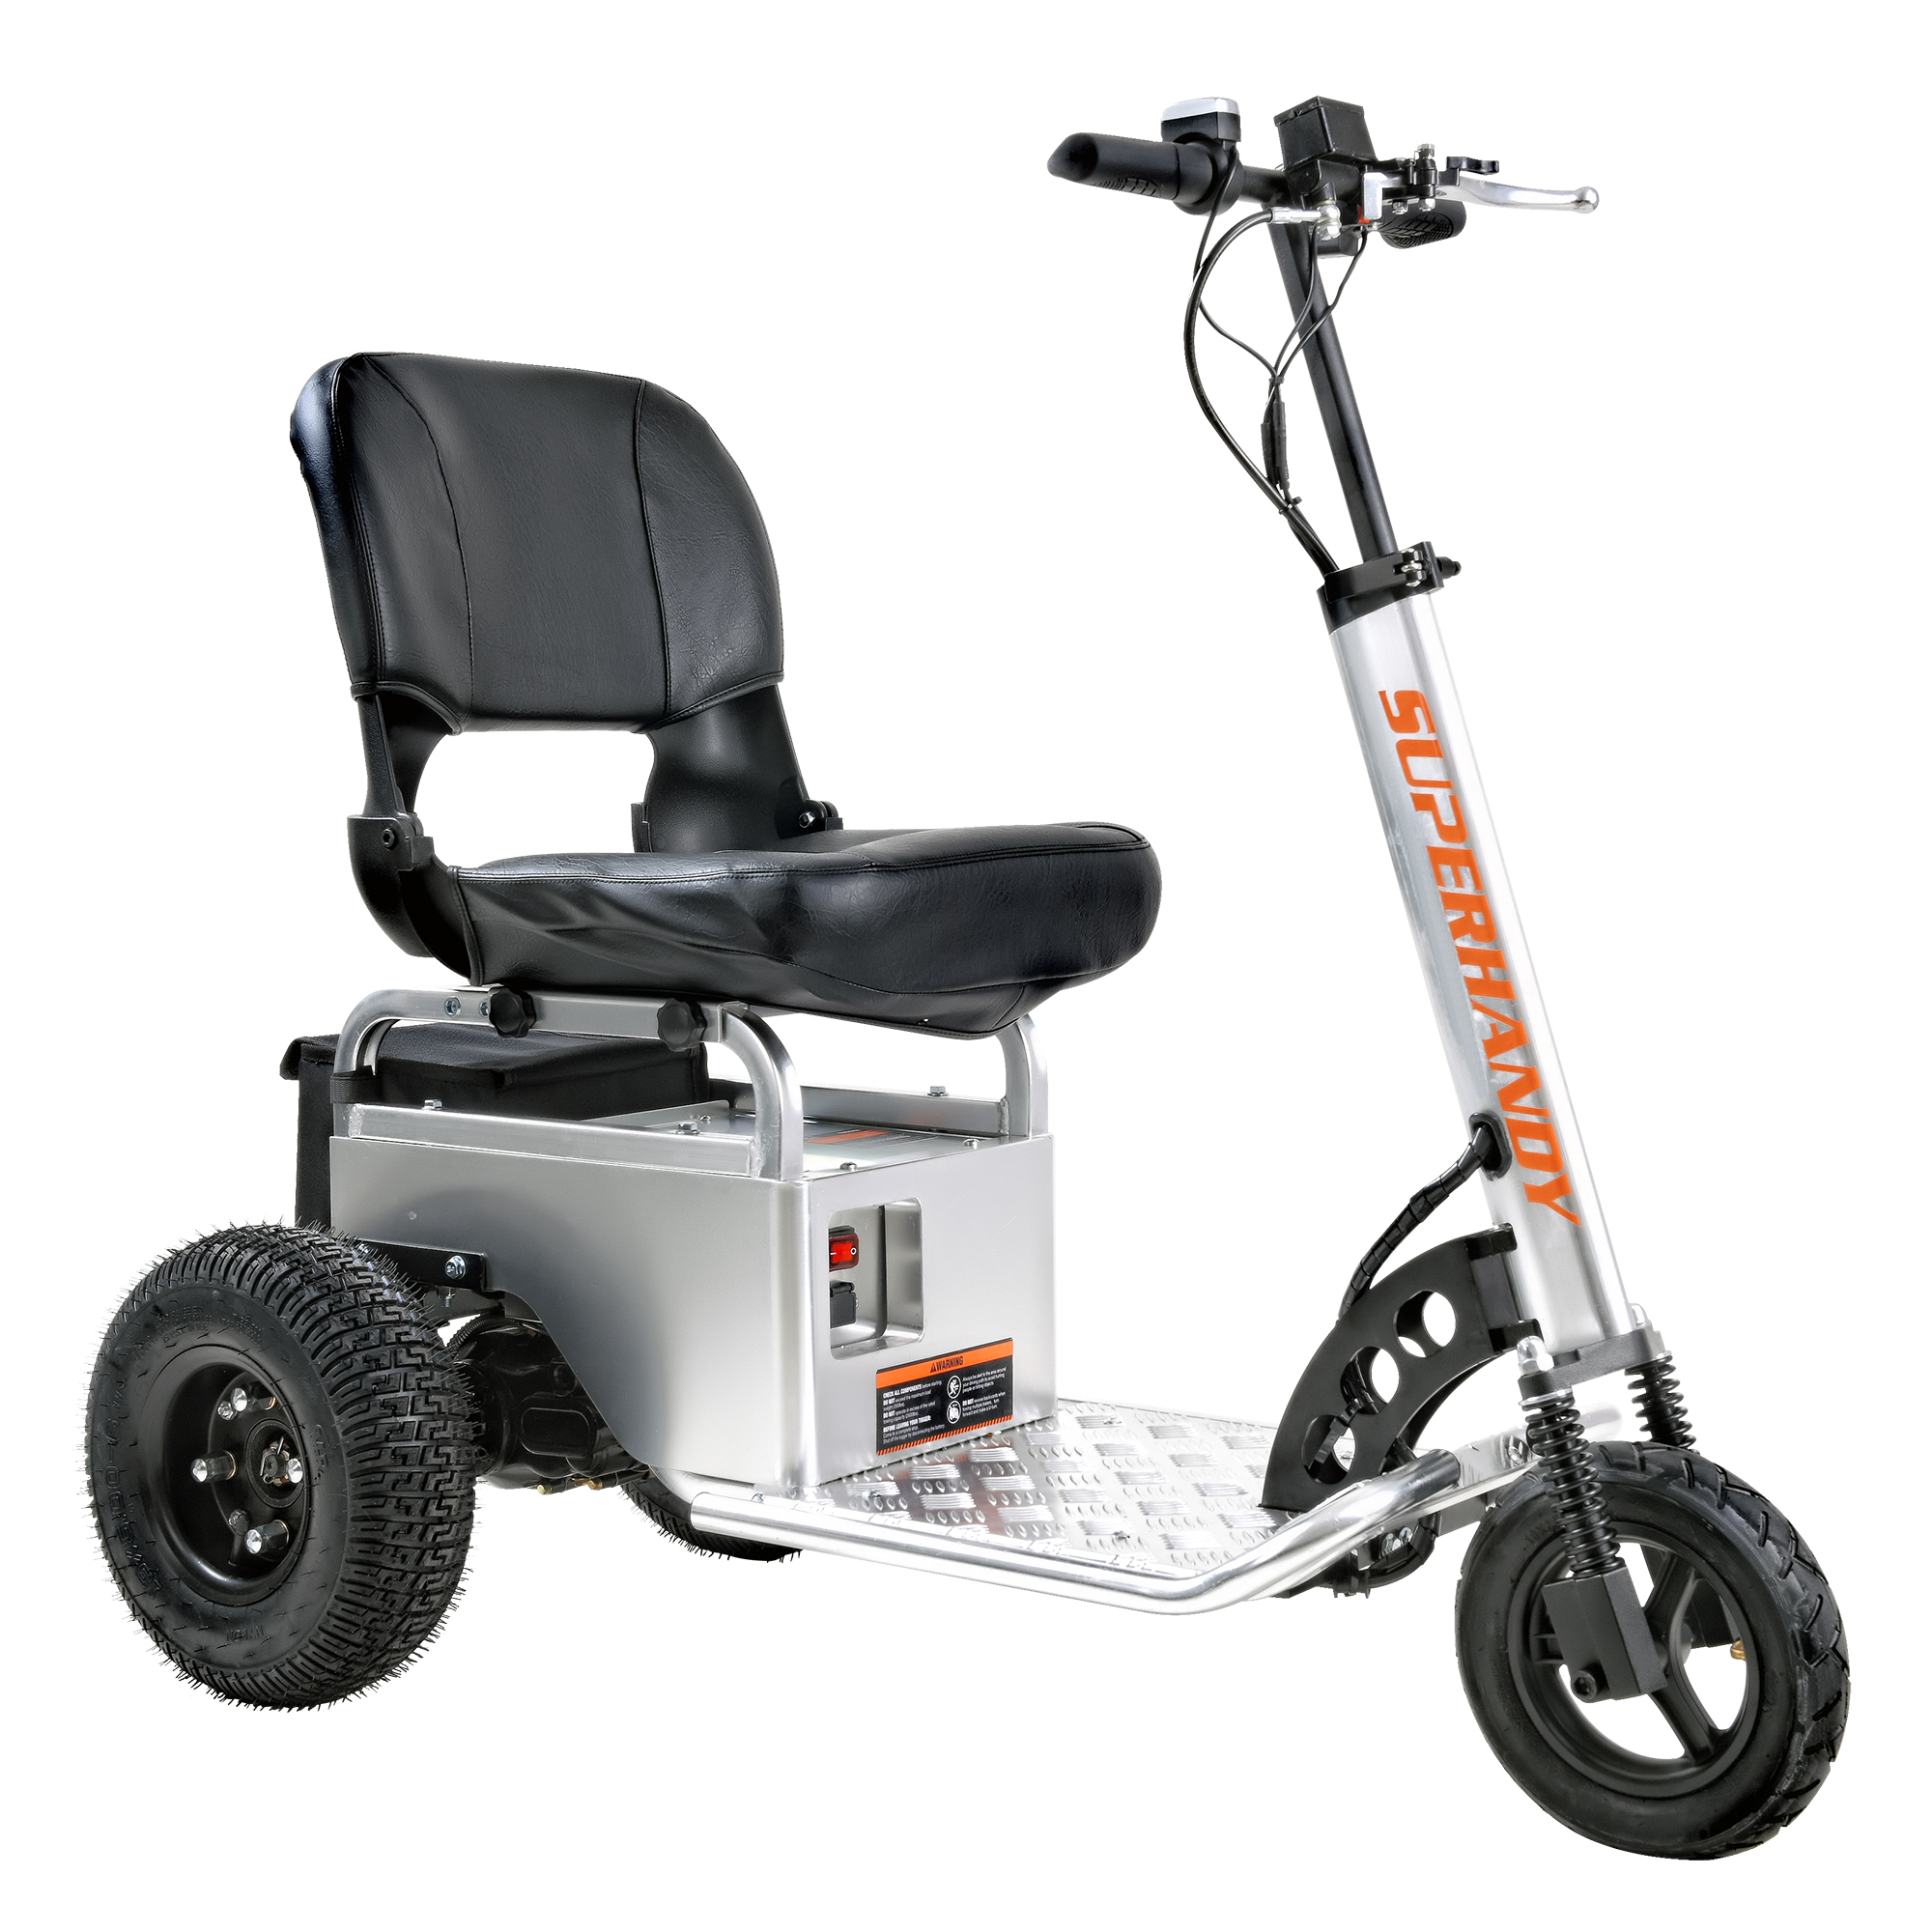 SuperHandy, Tow Tractor Riding Scooter, Weight Capacity 350 lb, Model TRI-GUO098